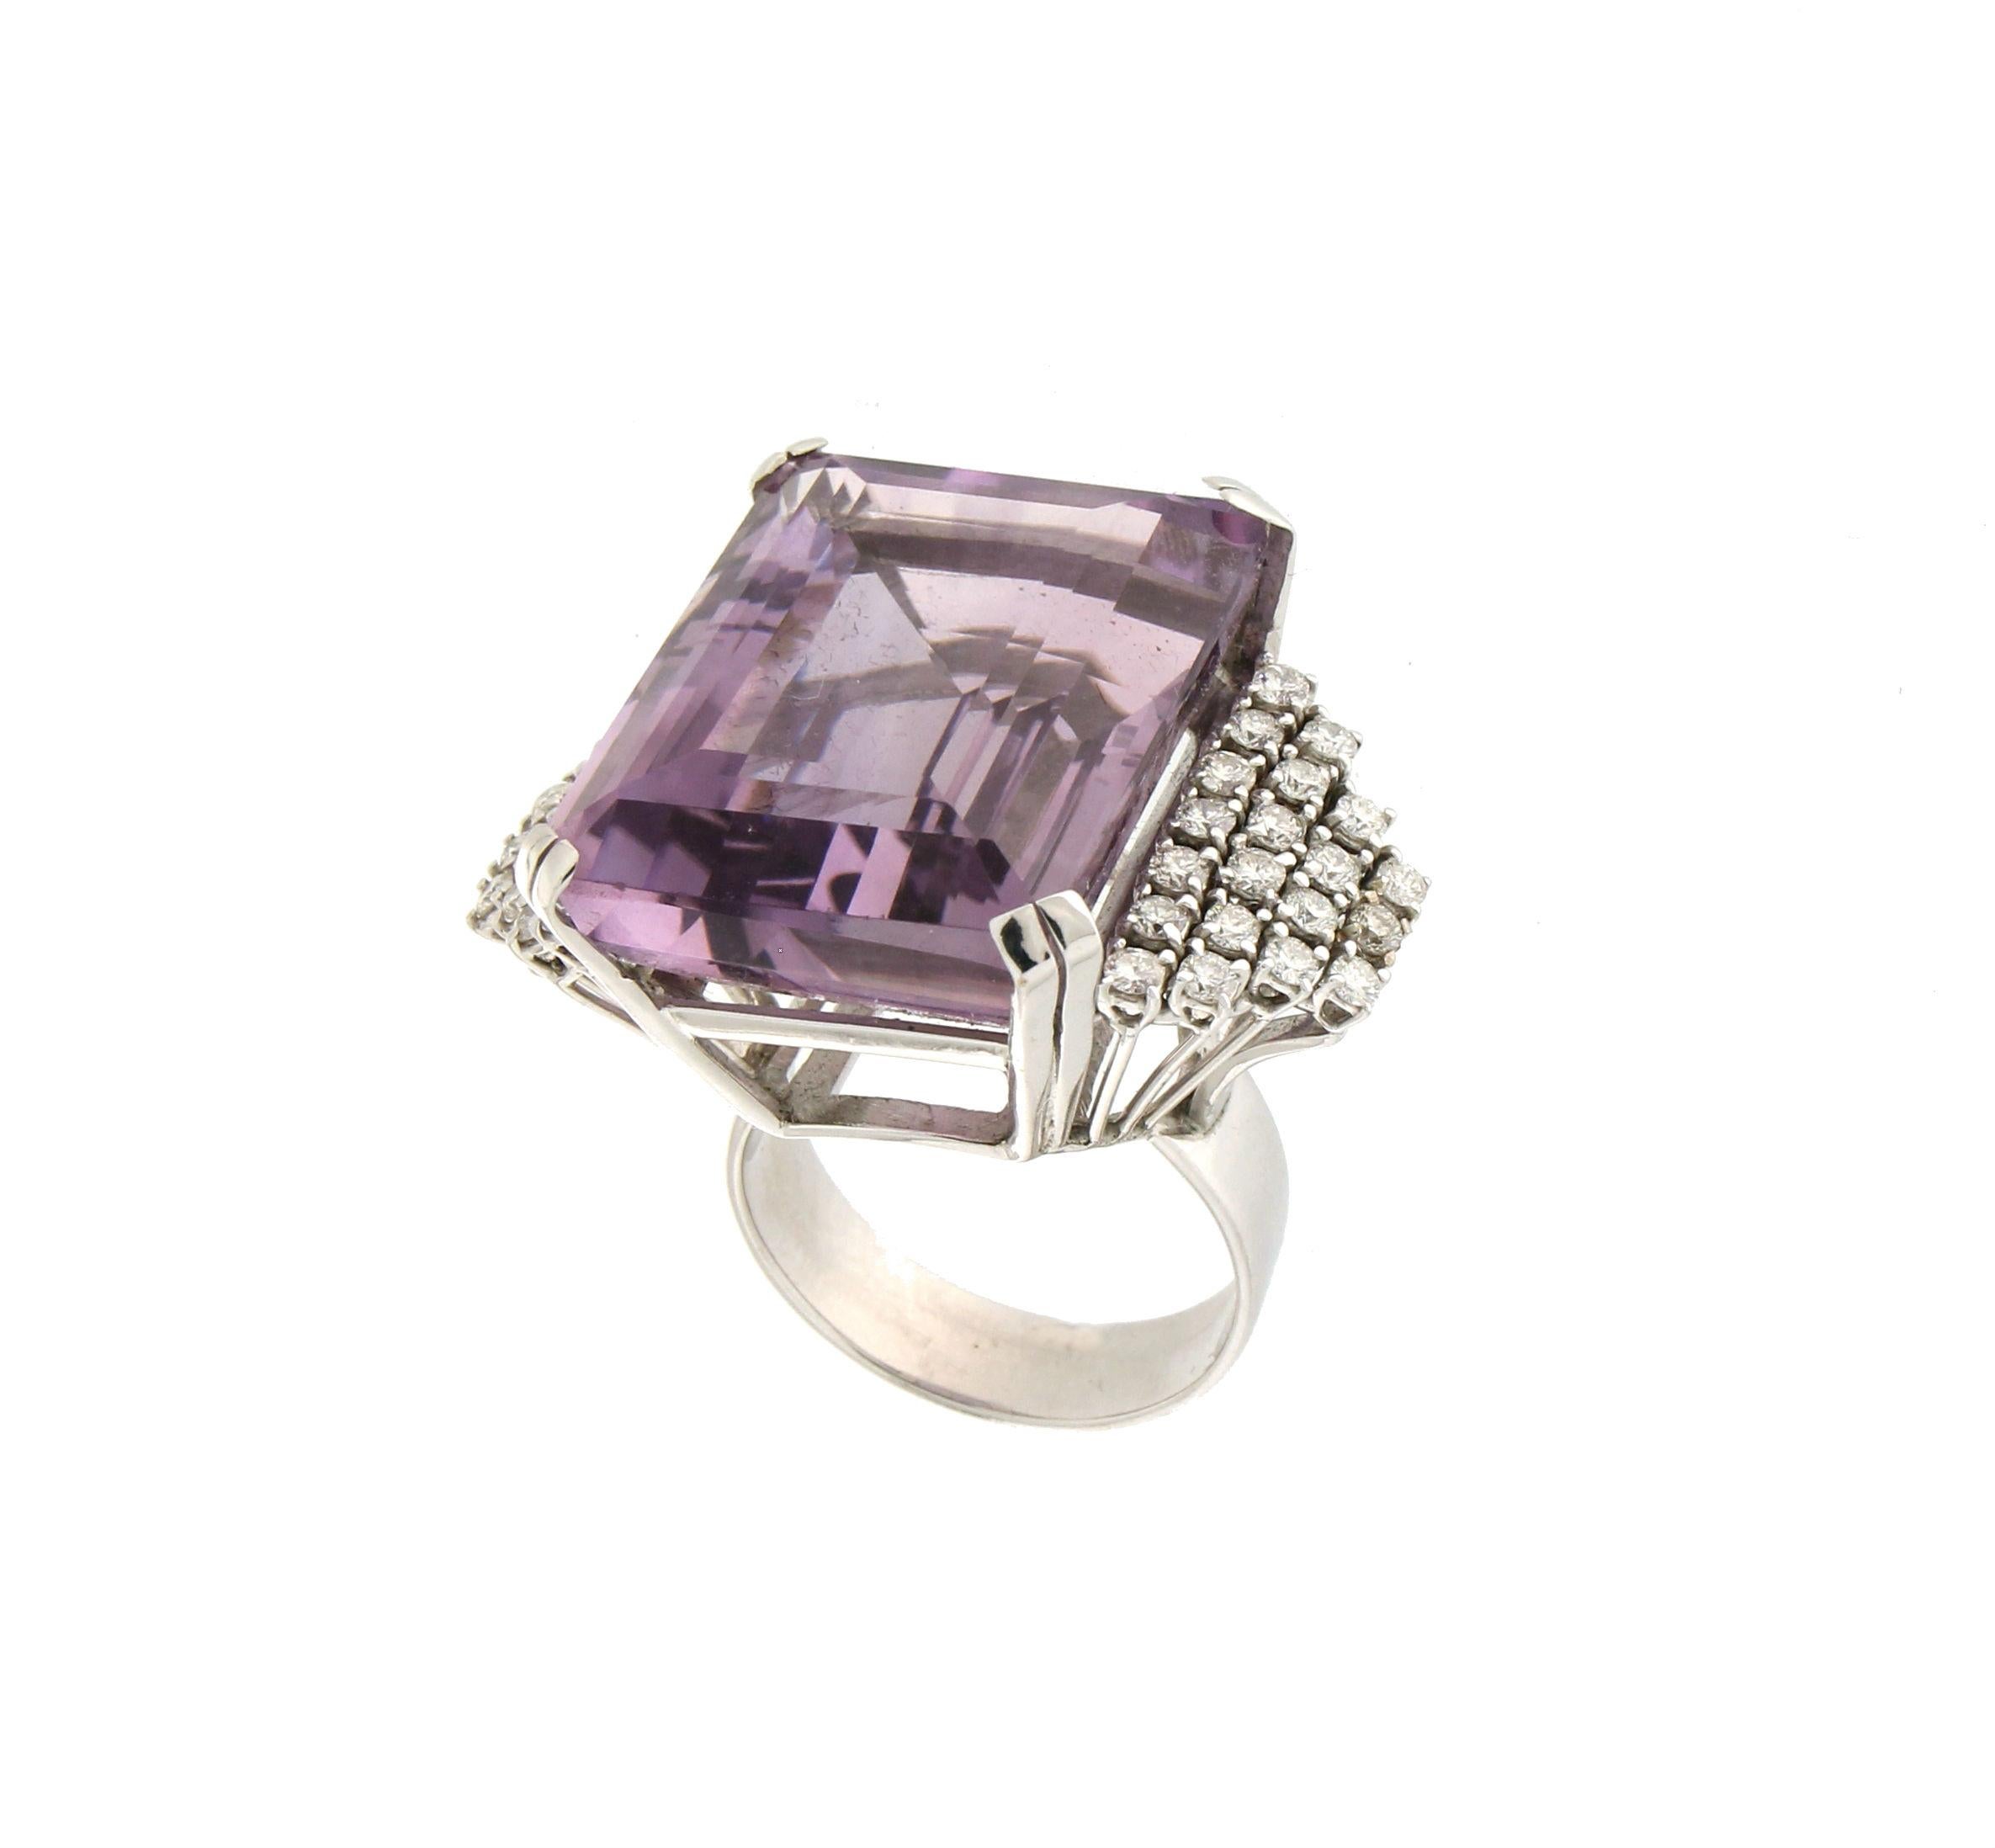 18 karat white gold cocktail ring. Handmade by our artisans assembled with diamonds and amethyst

Diamonds weight 1.51 karat
Amethyst weight 56.50 karat
Ring total weight 27.10 grams
Ring size 9.50 US 20.50 Ita
(all rings are can be resized)